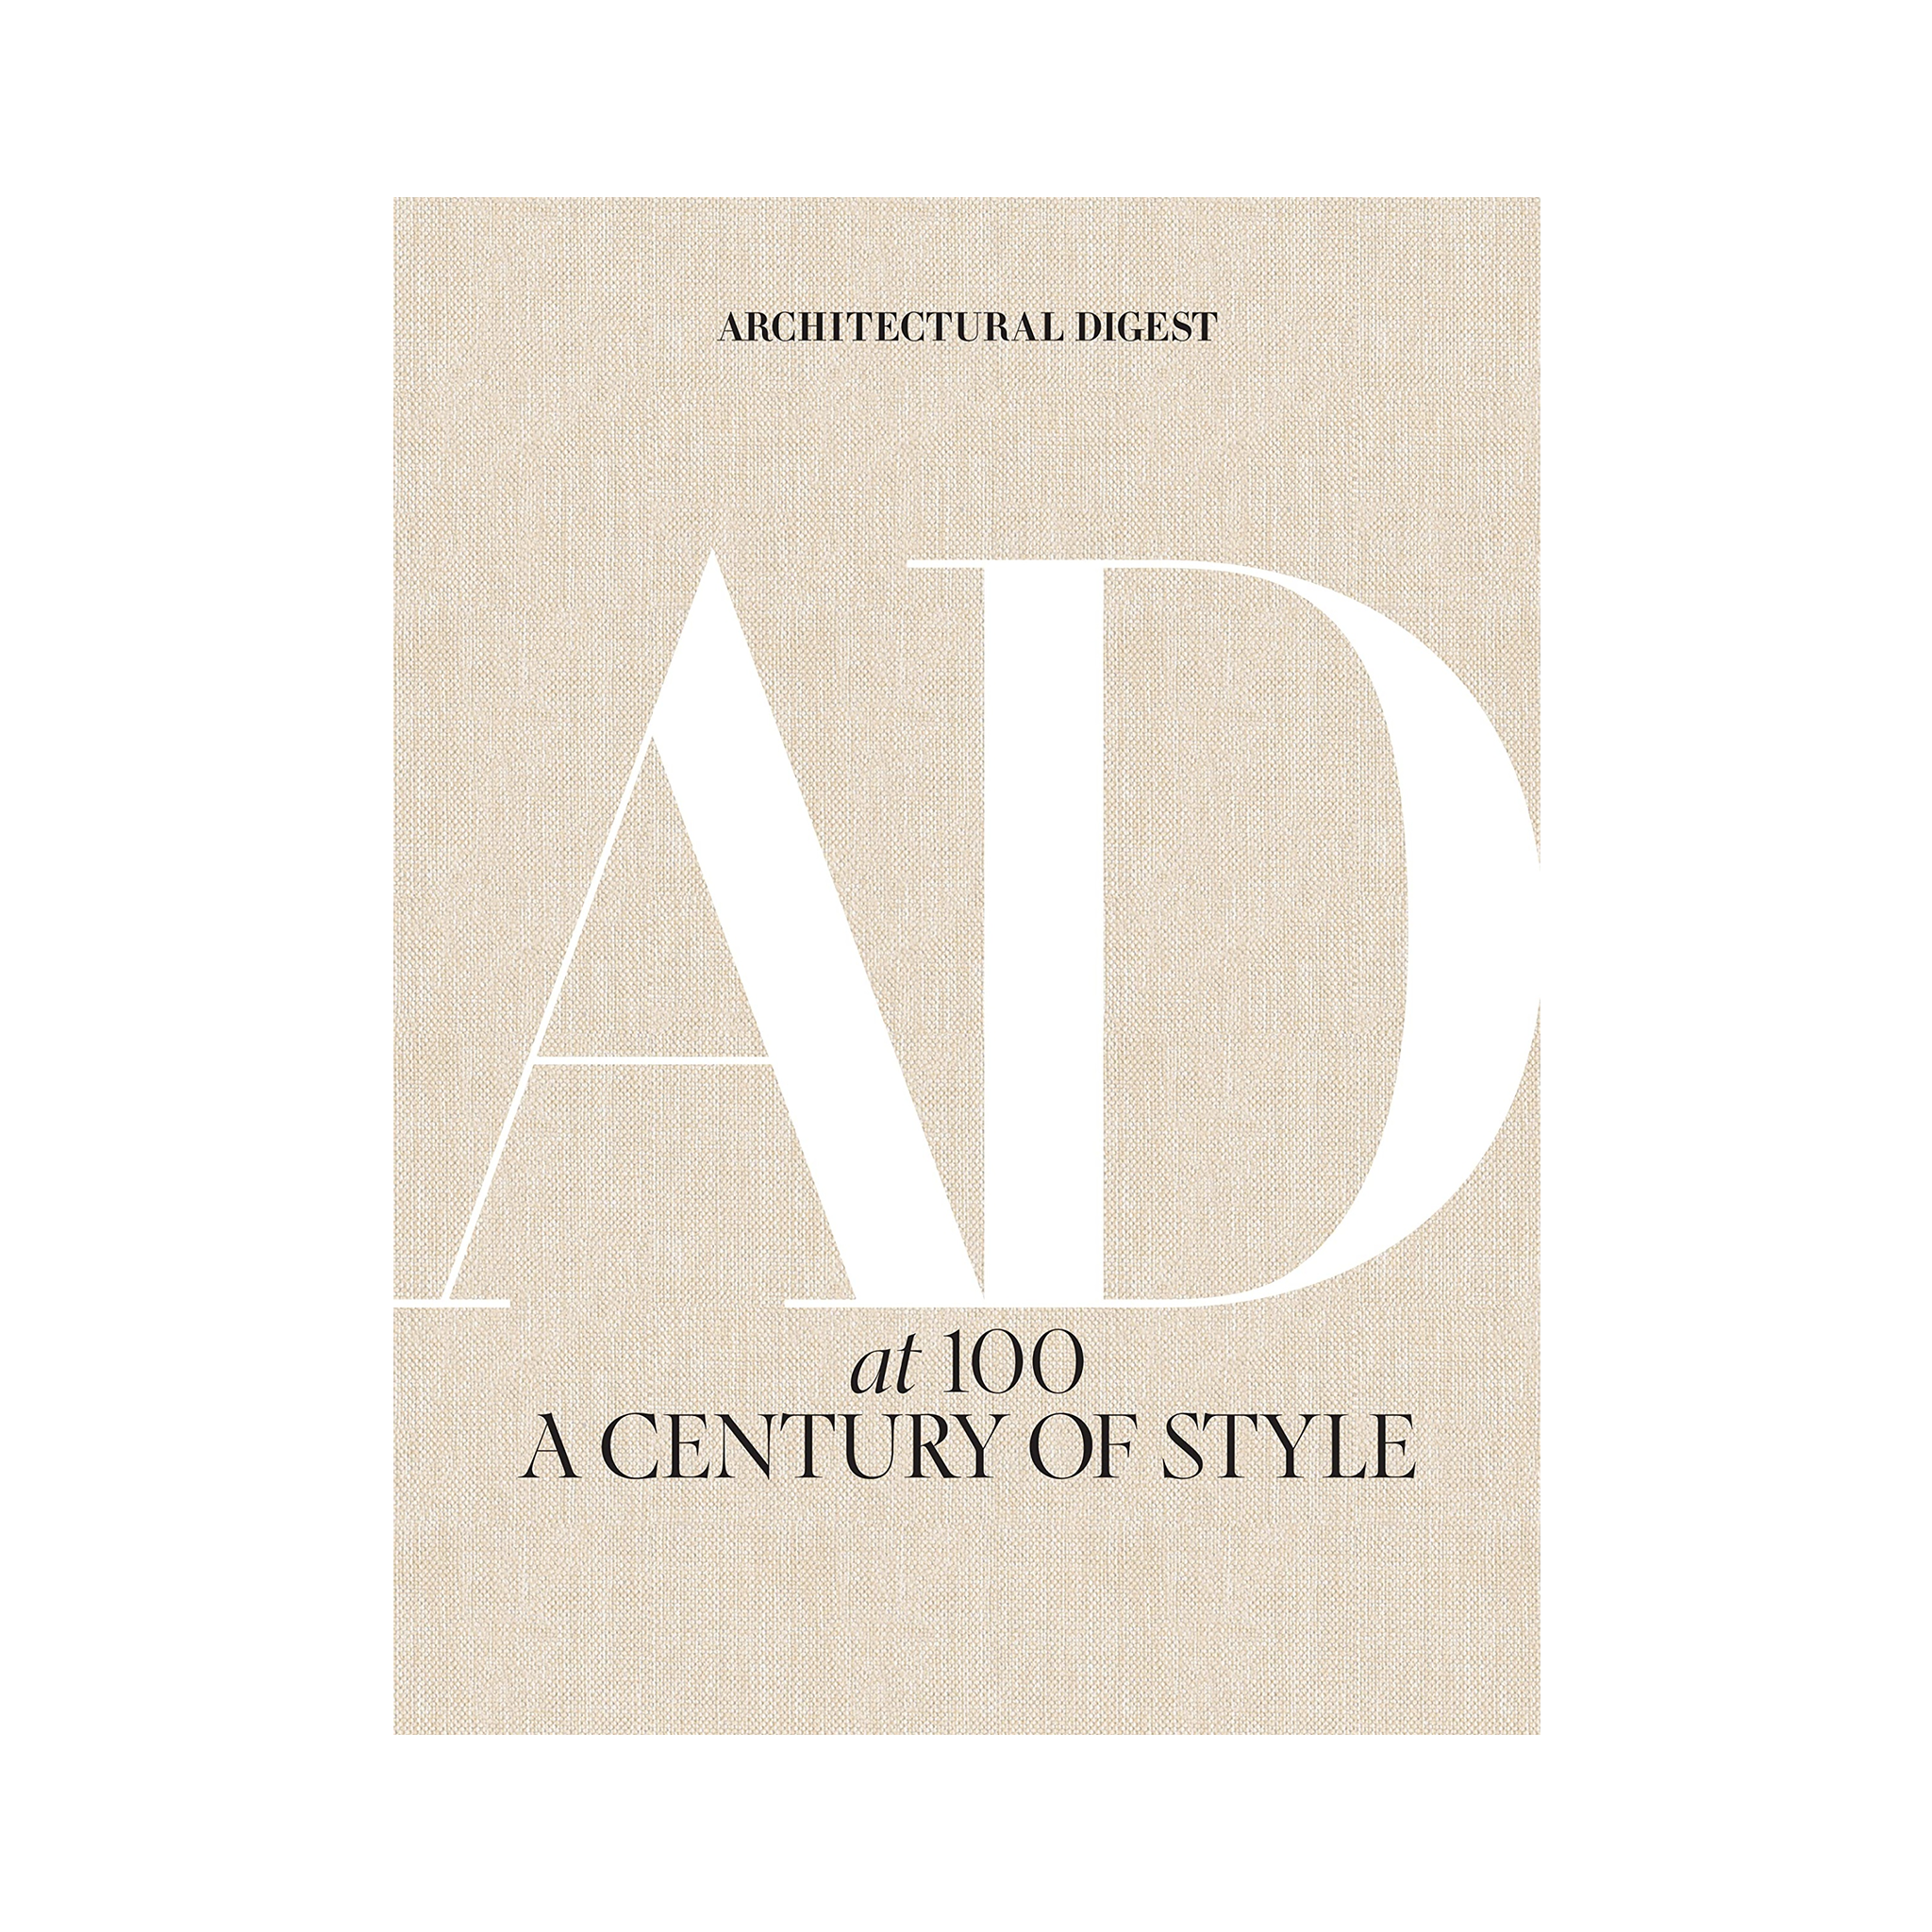 Architectural Digest: A Century of Style